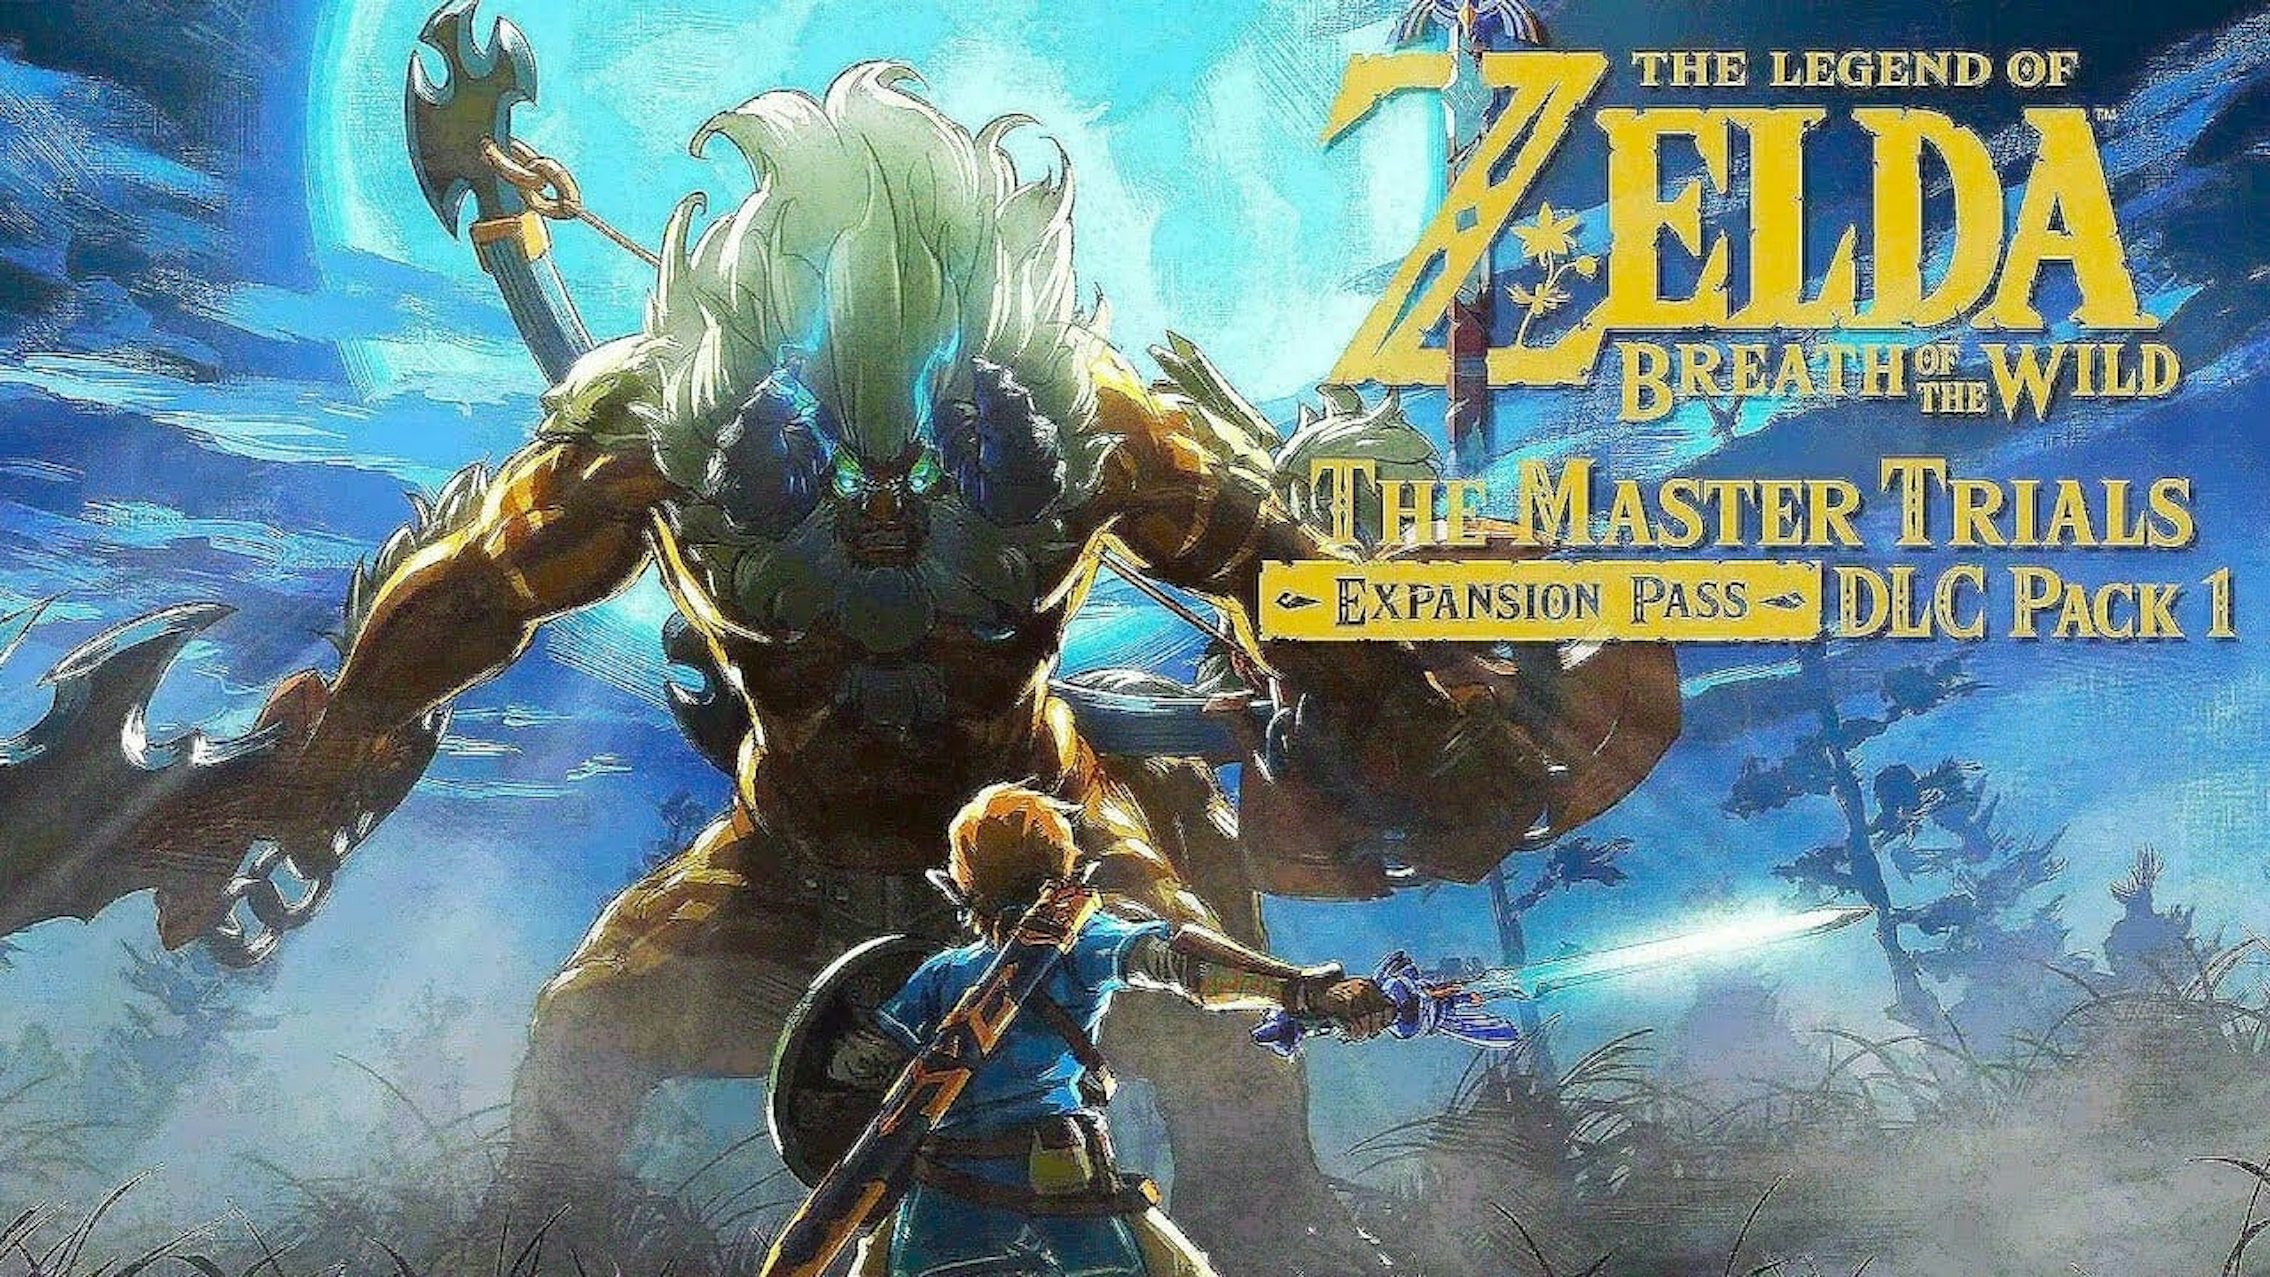 The Legend of Zelda: Breath of the Wild - Expansion Pass: DLC Pack